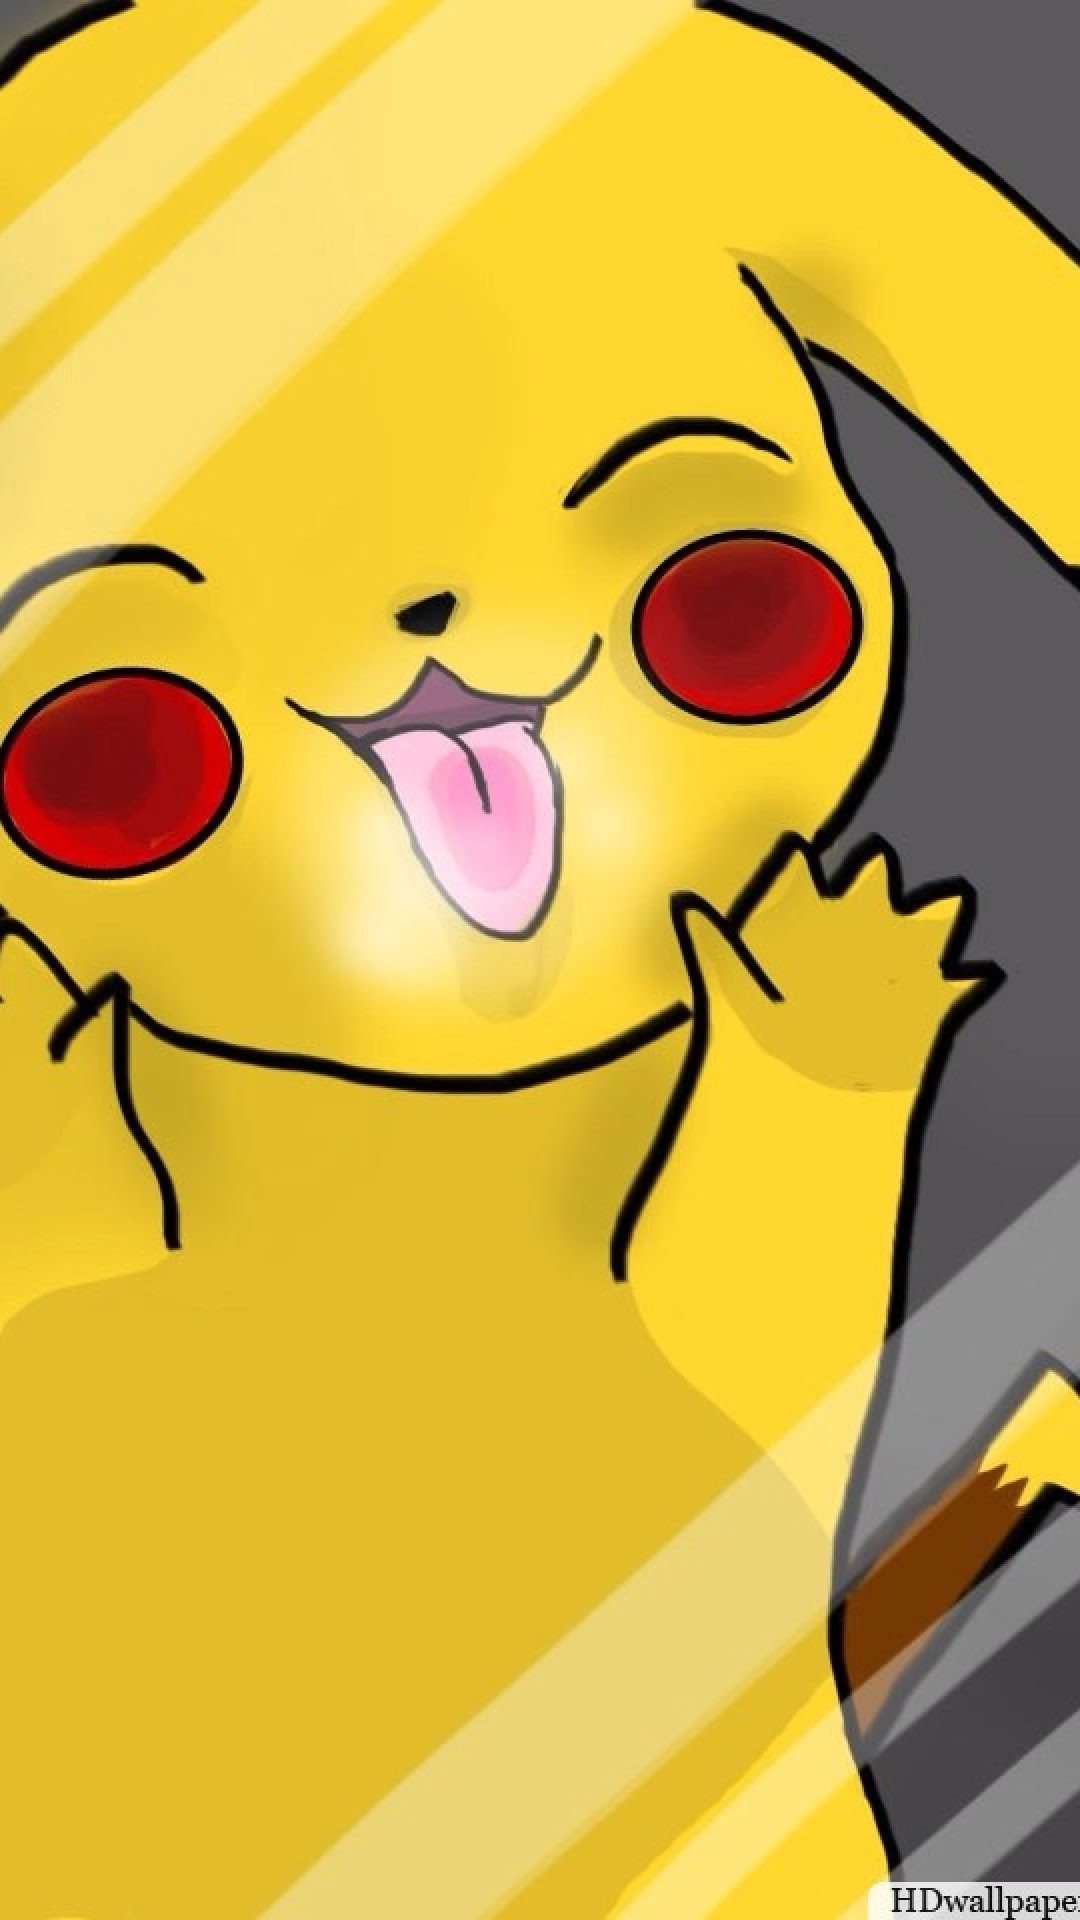 1080x1920 pikachu live wallpaper android